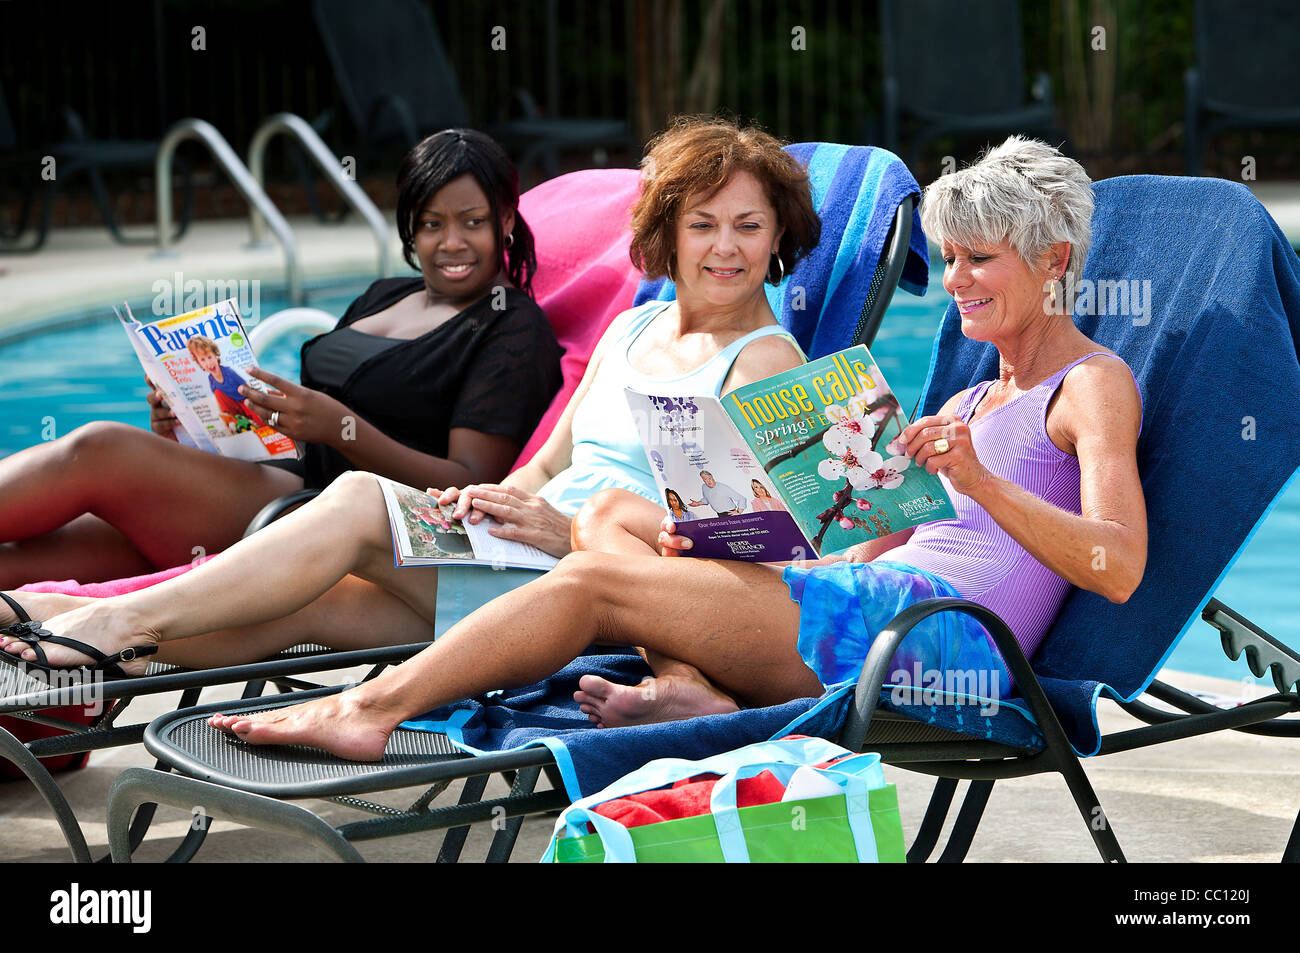 Three women enjoy themselves by the pool side. Stock Photo